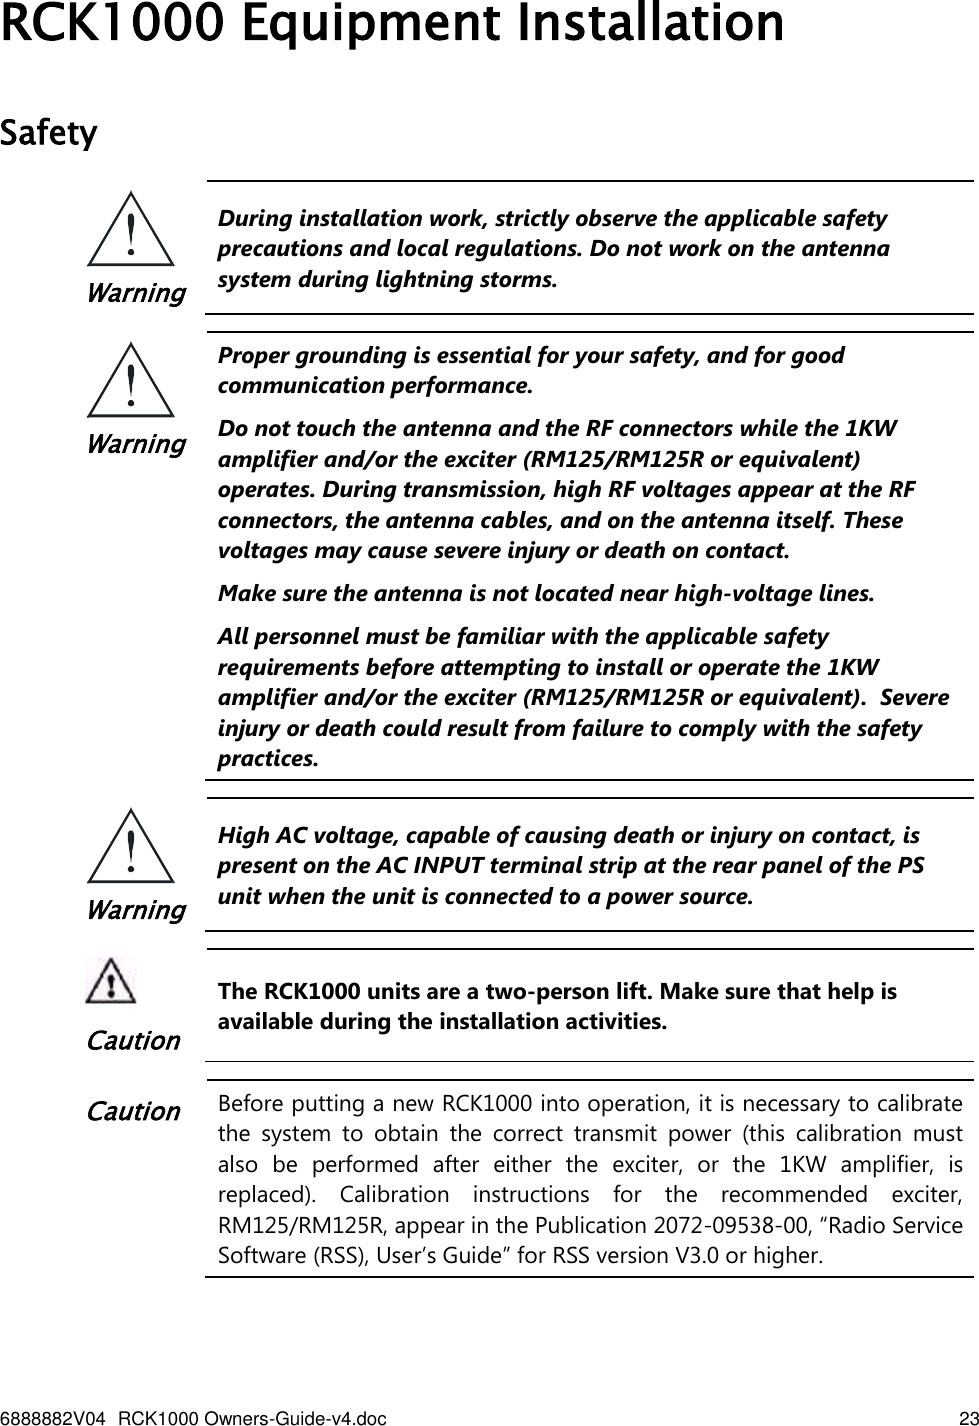 6888882V04 RCK1000 Owners-Guide-v4.doc    23   RCK1000 Equipment Installation Safety  Warning During installation work, strictly observe the applicable safety precautions and local regulations. Do not work on the antenna system during lightning storms.   Warning Proper grounding is essential for your safety, and for good communication performance.  Do not touch the antenna and the RF connectors while the 1KW amplifier and/or the exciter (RM125/RM125R or equivalent) operates. During transmission, high RF voltages appear at the RF connectors, the antenna cables, and on the antenna itself. These voltages may cause severe injury or death on contact. Make sure the antenna is not located near high-voltage lines. All personnel must be familiar with the applicable safety requirements before attempting to install or operate the 1KW amplifier and/or the exciter (RM125/RM125R or equivalent).  Severe injury or death could result from failure to comply with the safety practices.  Warning High AC voltage, capable of causing death or injury on contact, is present on the AC INPUT terminal strip at the rear panel of the PS unit when the unit is connected to a power source.    Caution The RCK1000 units are a two-person lift. Make sure that help is available during the installation activities.  Caution Before putting a new RCK1000 into operation, it is necessary to calibrate the  system  to  obtain  the  correct  transmit  power  (this  calibration  must also  be  performed  after  either  the  exciter,  or  the  1KW  amplifier,  is replaced).  Calibration  instructions  for  the  recommended  exciter, RM125/RM125R, appear in the Publication 2072-09538-00, “Radio Service Software (RSS), User’s Guide” for RSS version V3.0 or higher.  